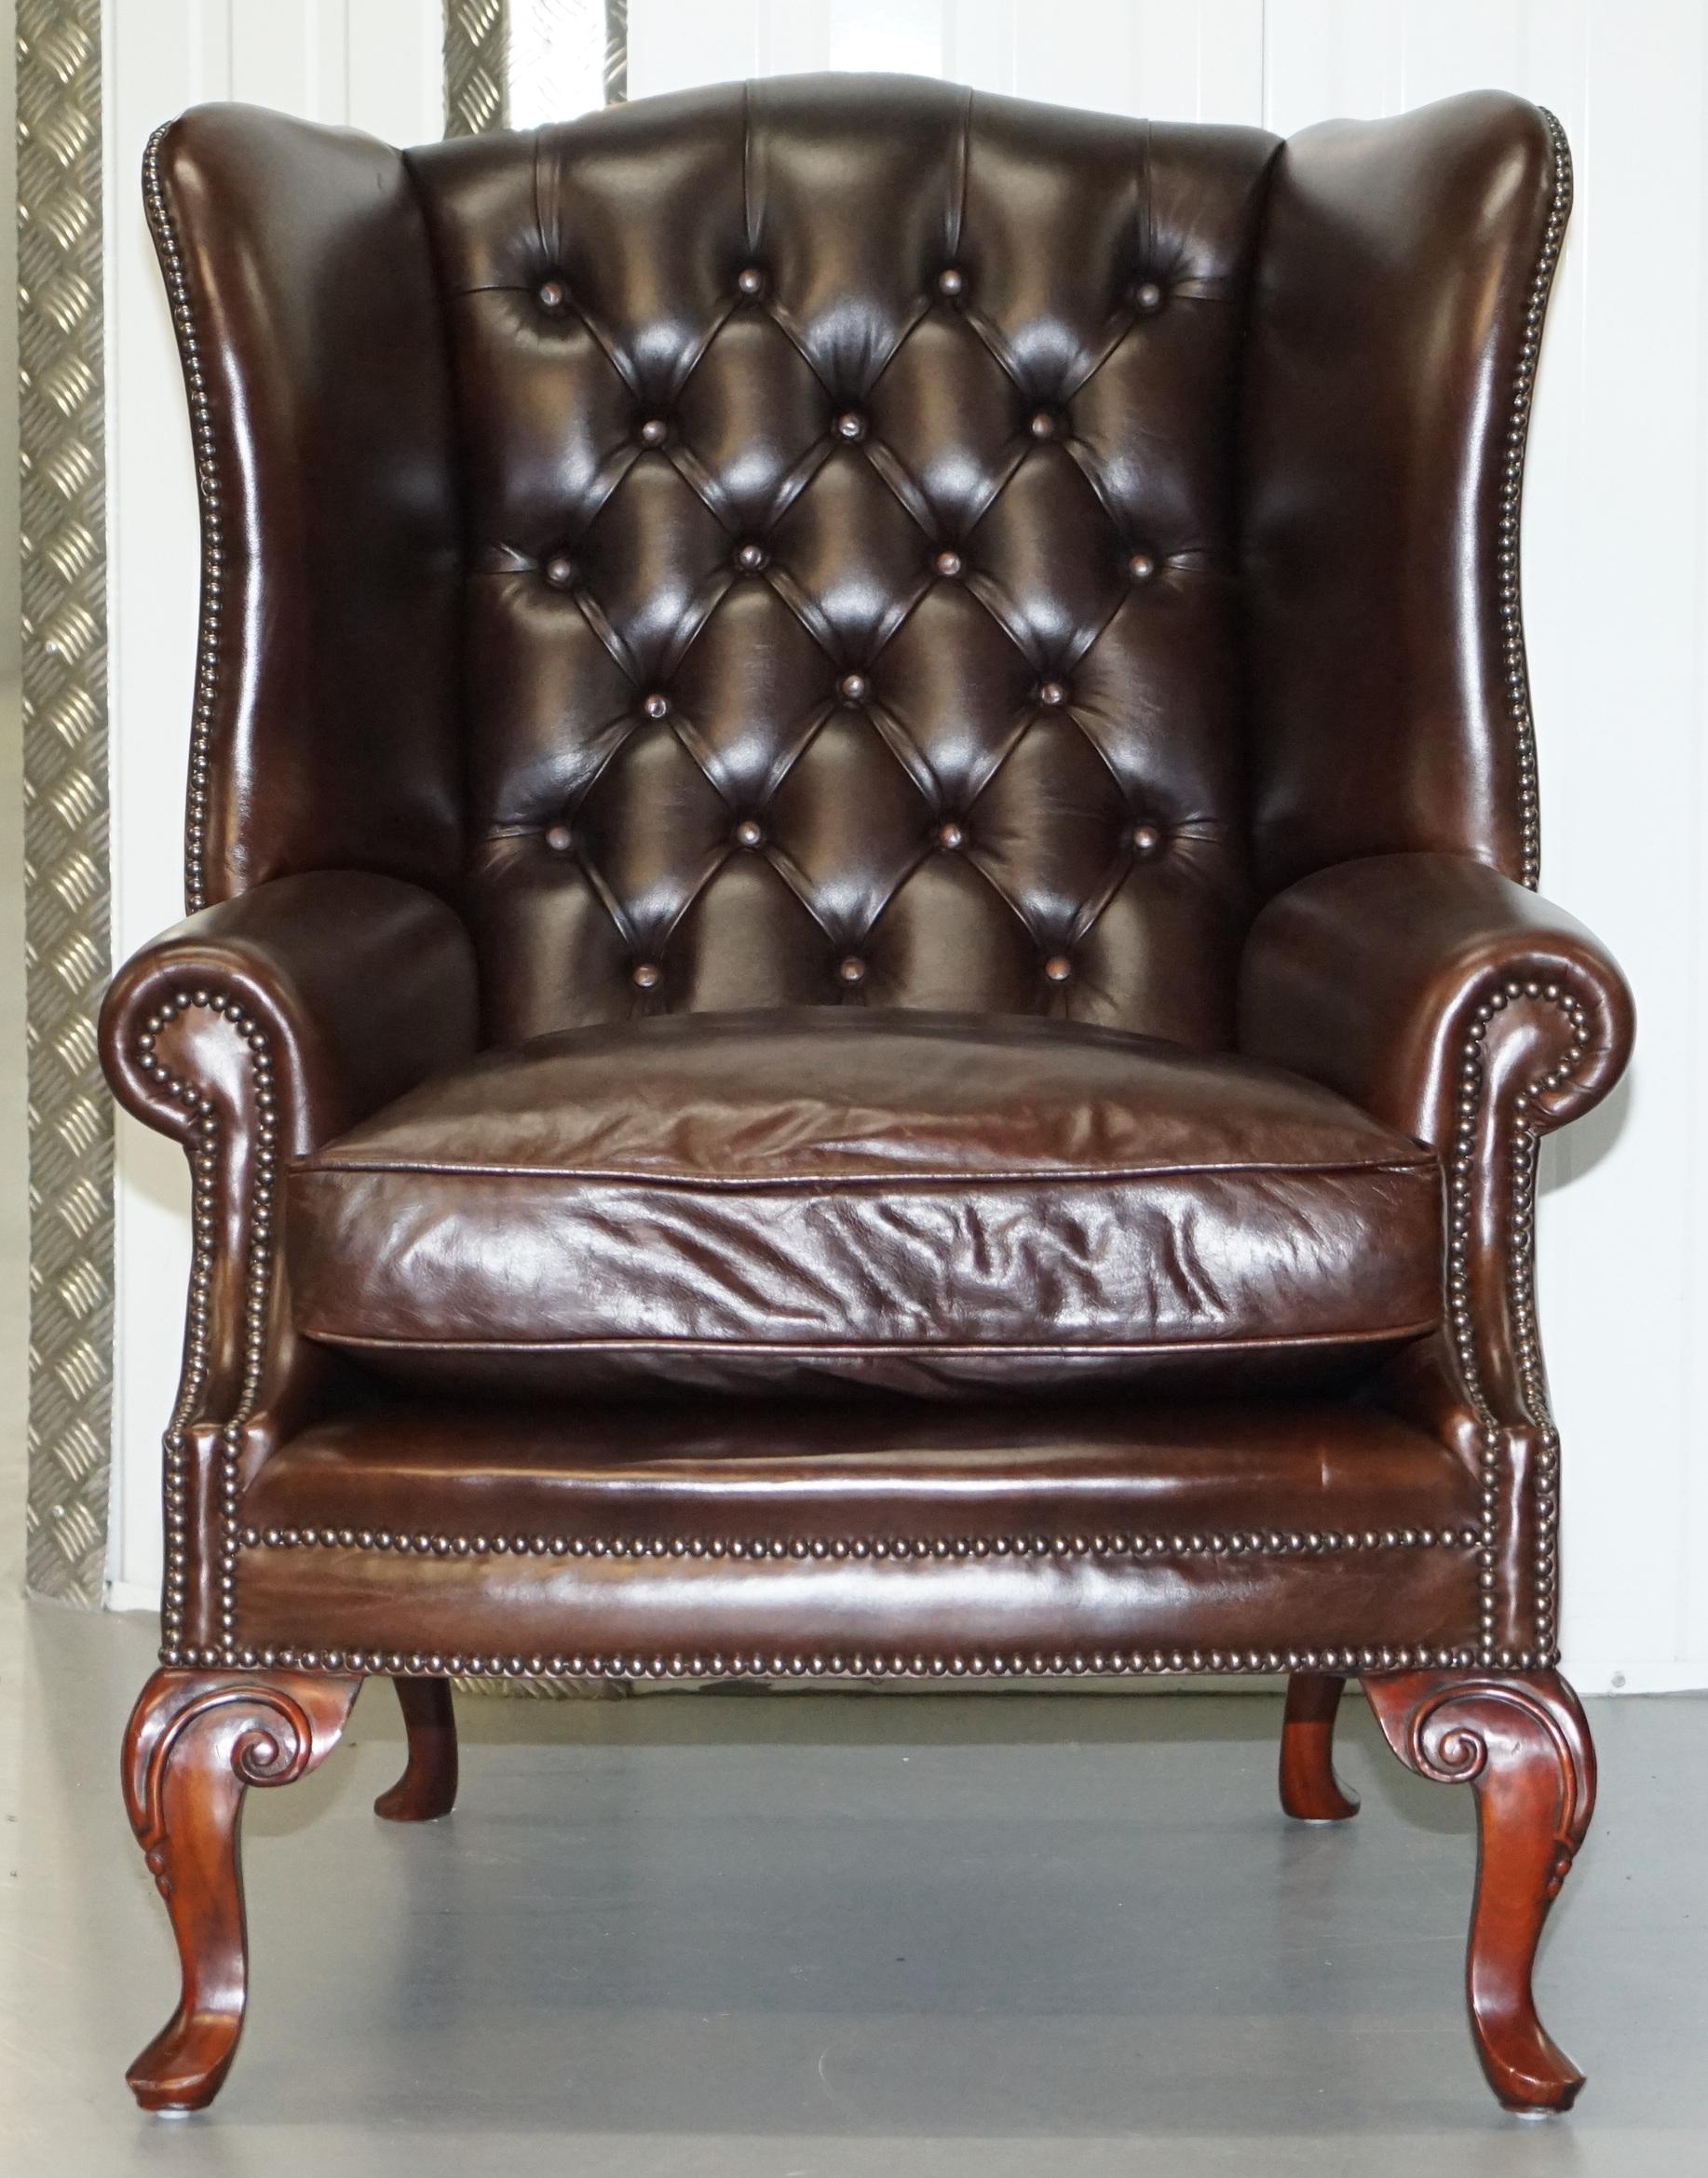 English Pair of Vintage Chesterfield Tufted Heritage Brown Leather Wingback Armchairs